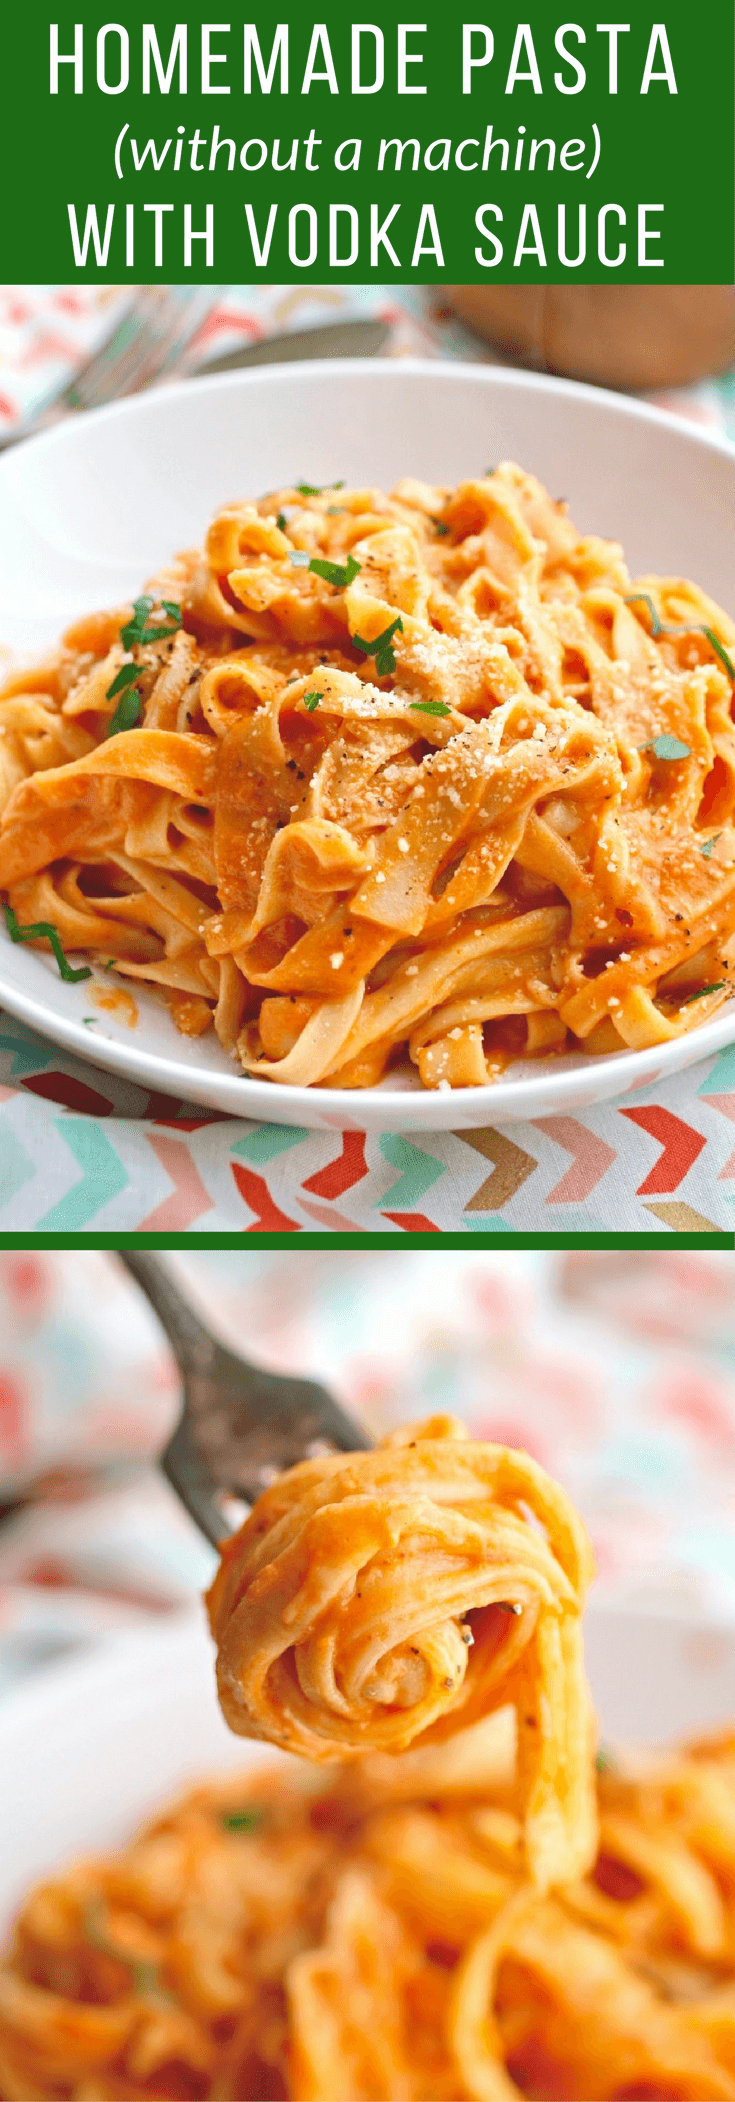 It's a treat to make Homemade Pasta (without a machine) with Vodka Sauce!